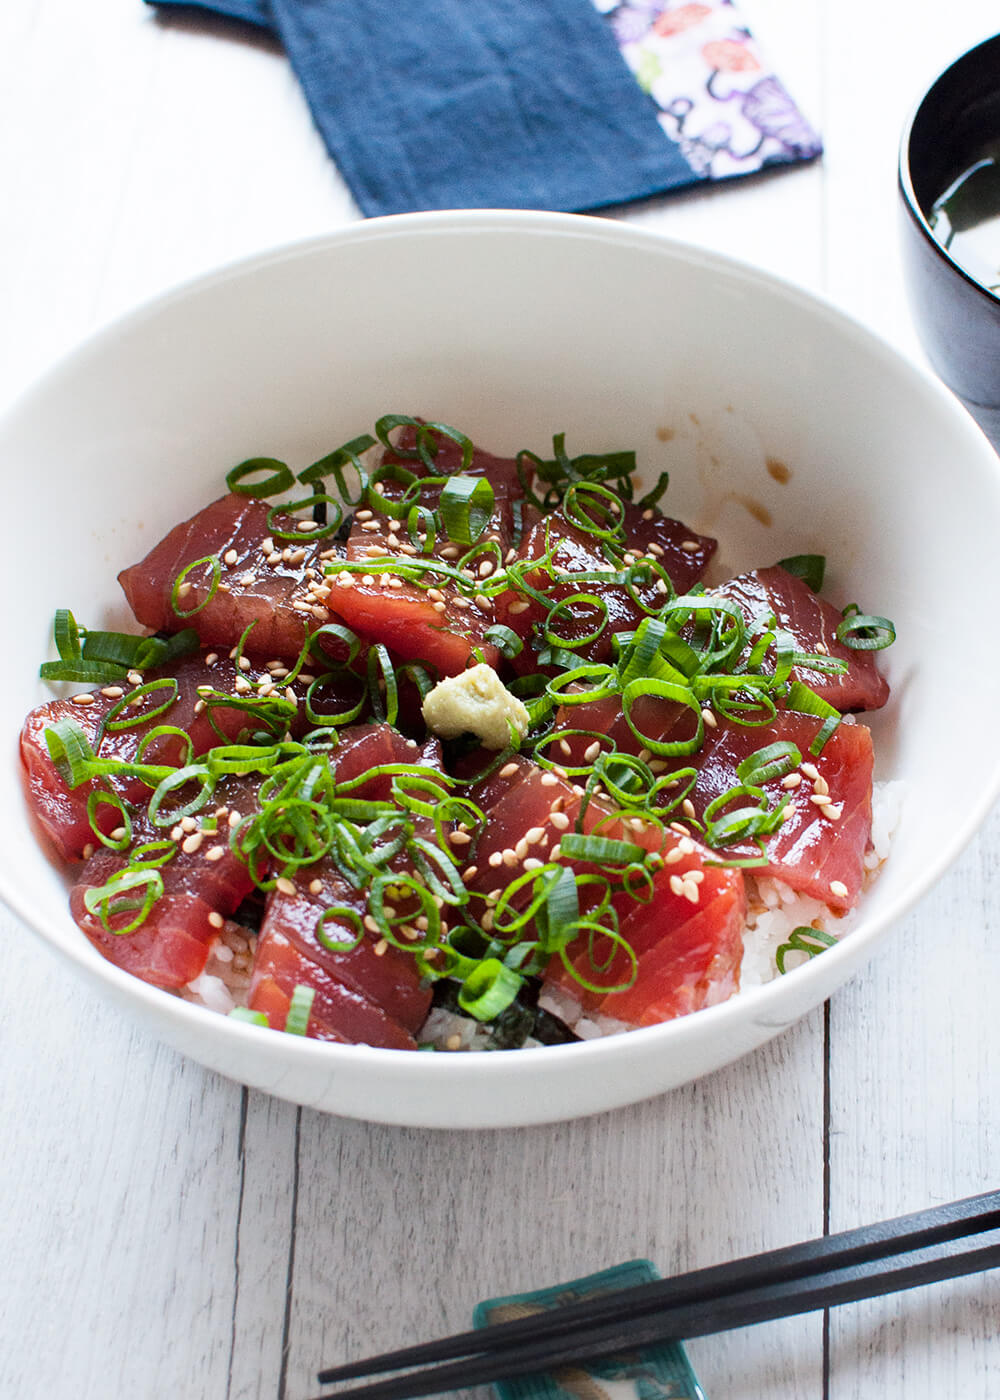 Super easy meal with sashimi quality tuna is one of my favourites. Maguro no Zuke-don (Marinated Tuna on Rice) requires no cooking. Just marinate tuna slices and place them on the cooked rice, topped with garnish.